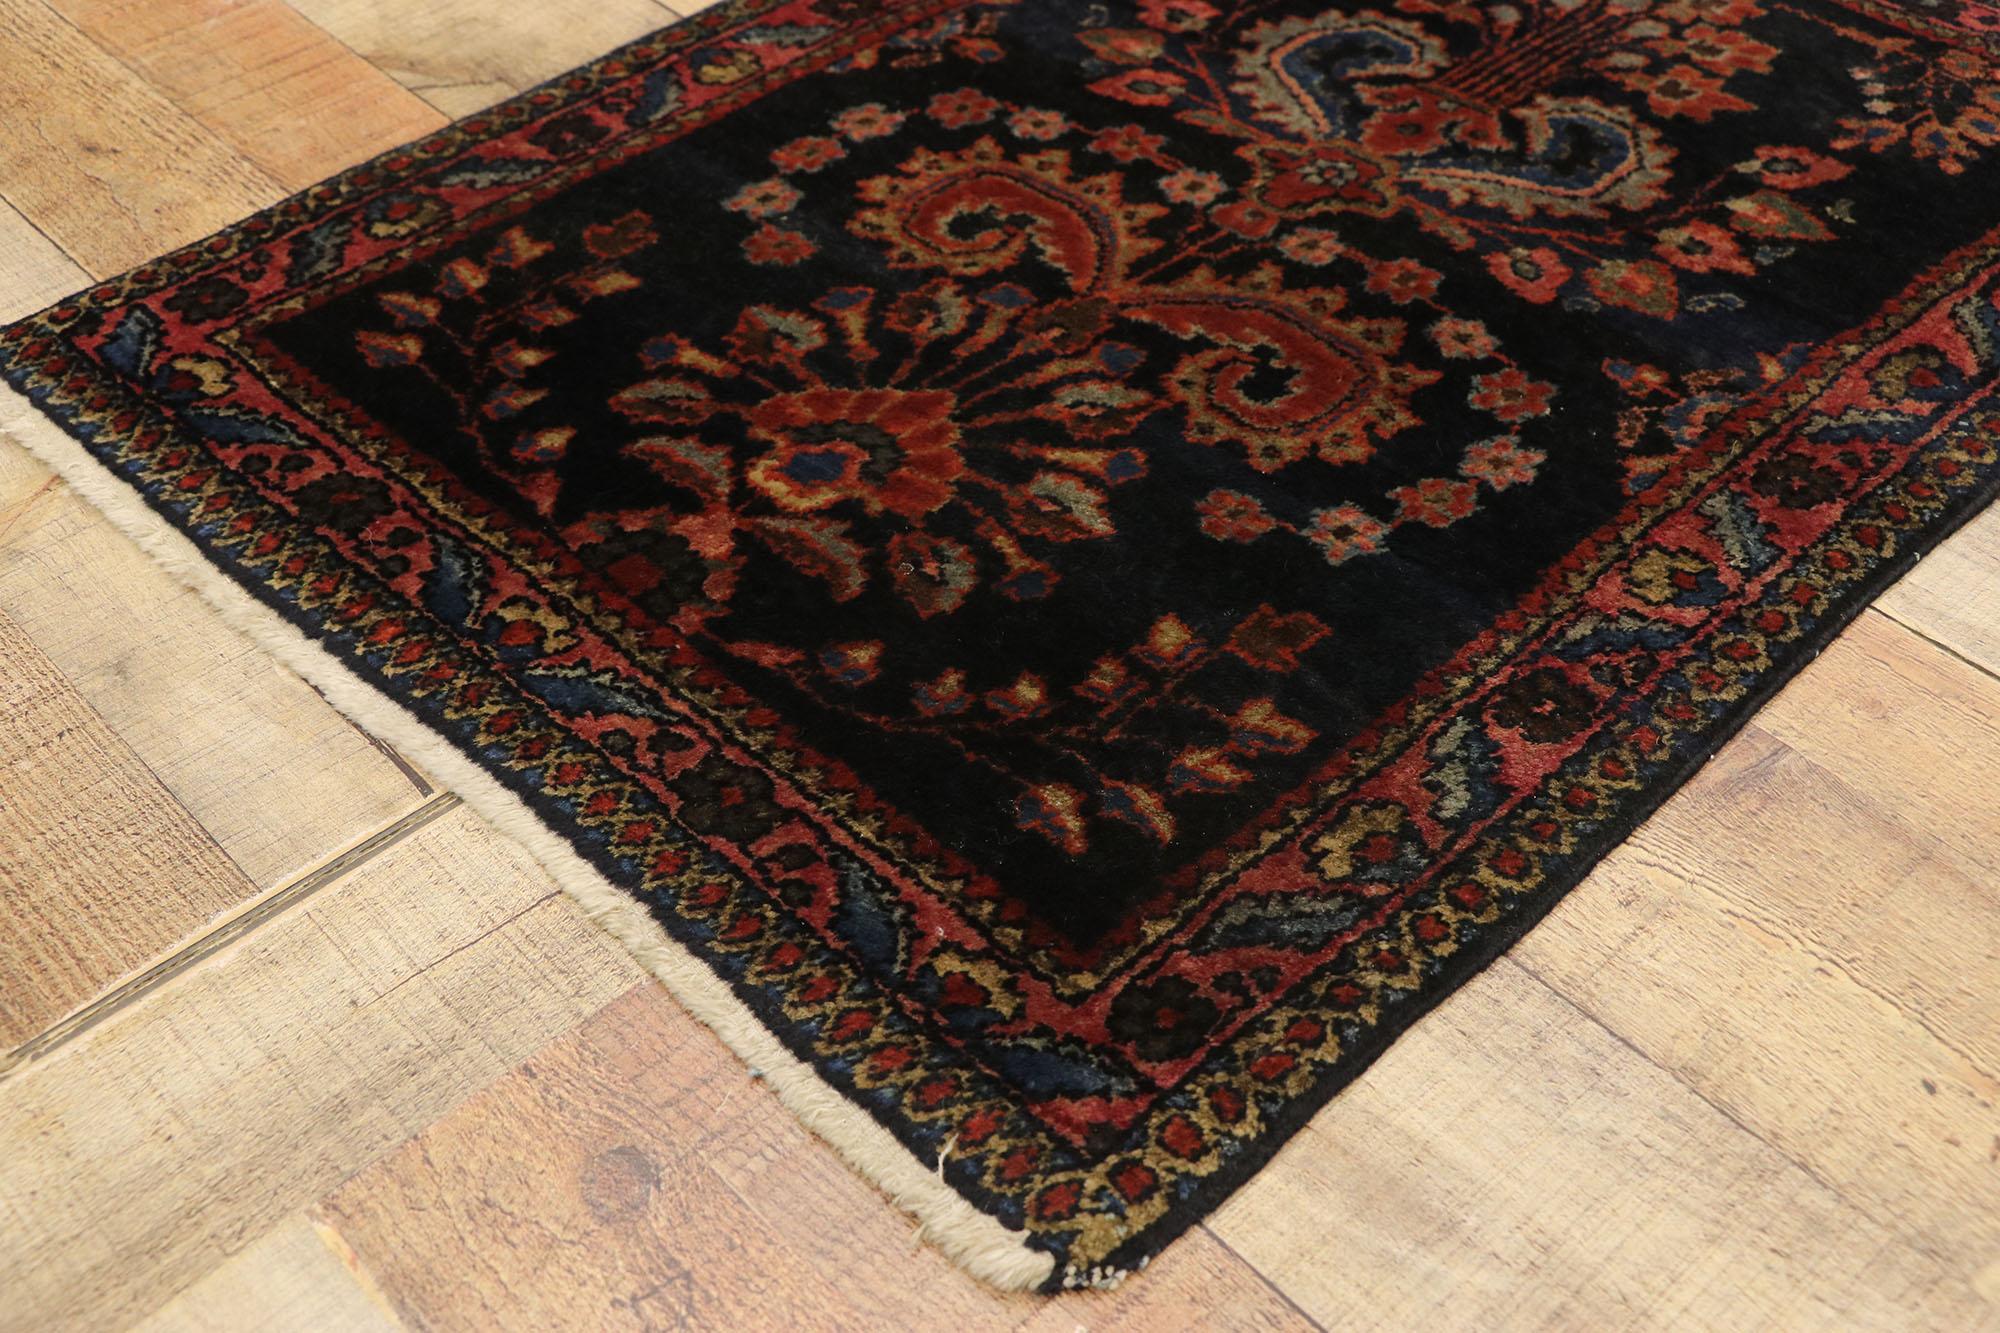 Antique Persian Mohajeran Sarouk Rug with Old World Victorian Style In Good Condition For Sale In Dallas, TX